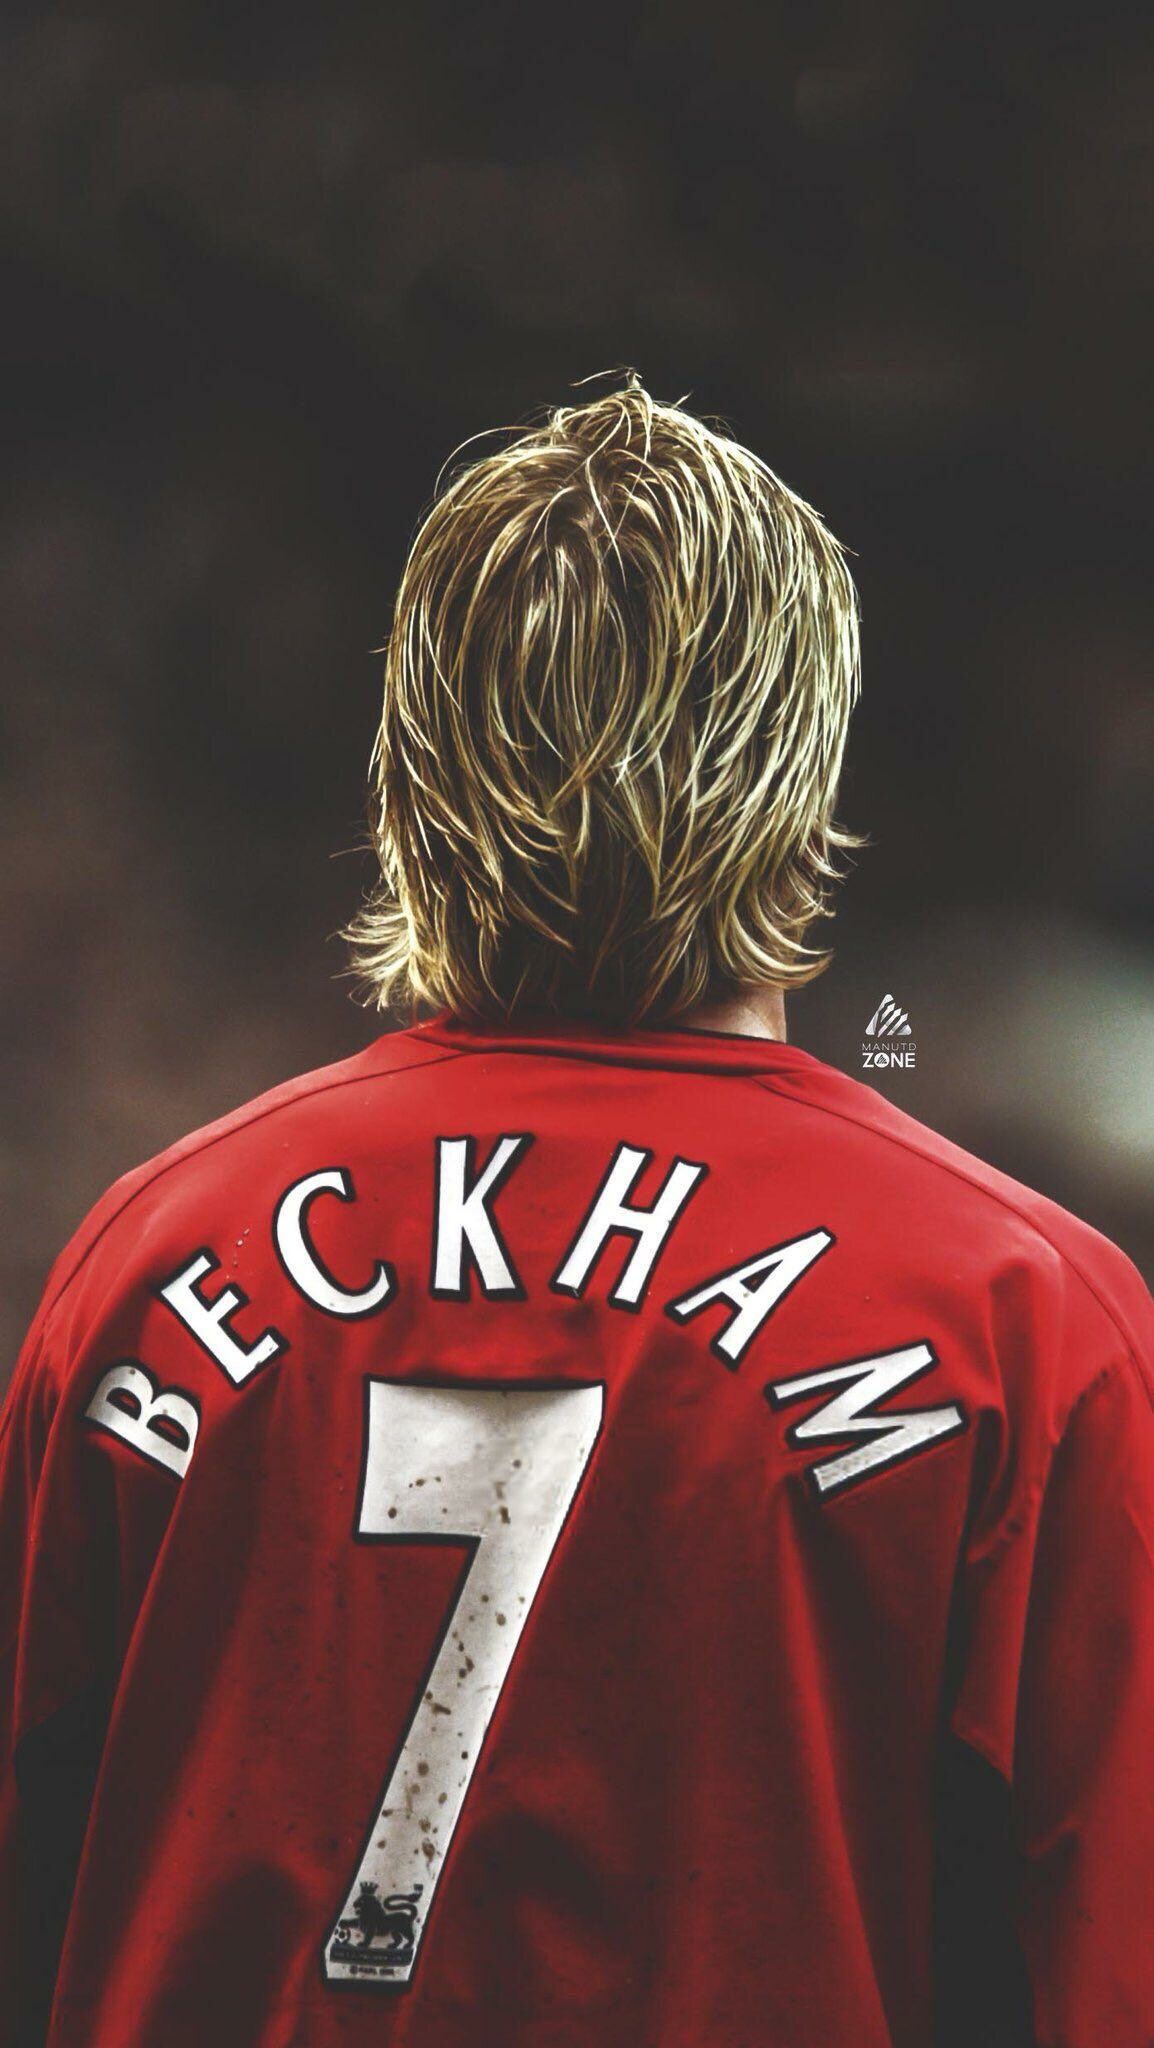 David Beckham: Had made 265 Premier League appearances for Manchester United and scored 61 goals. 1160x2050 HD Background.